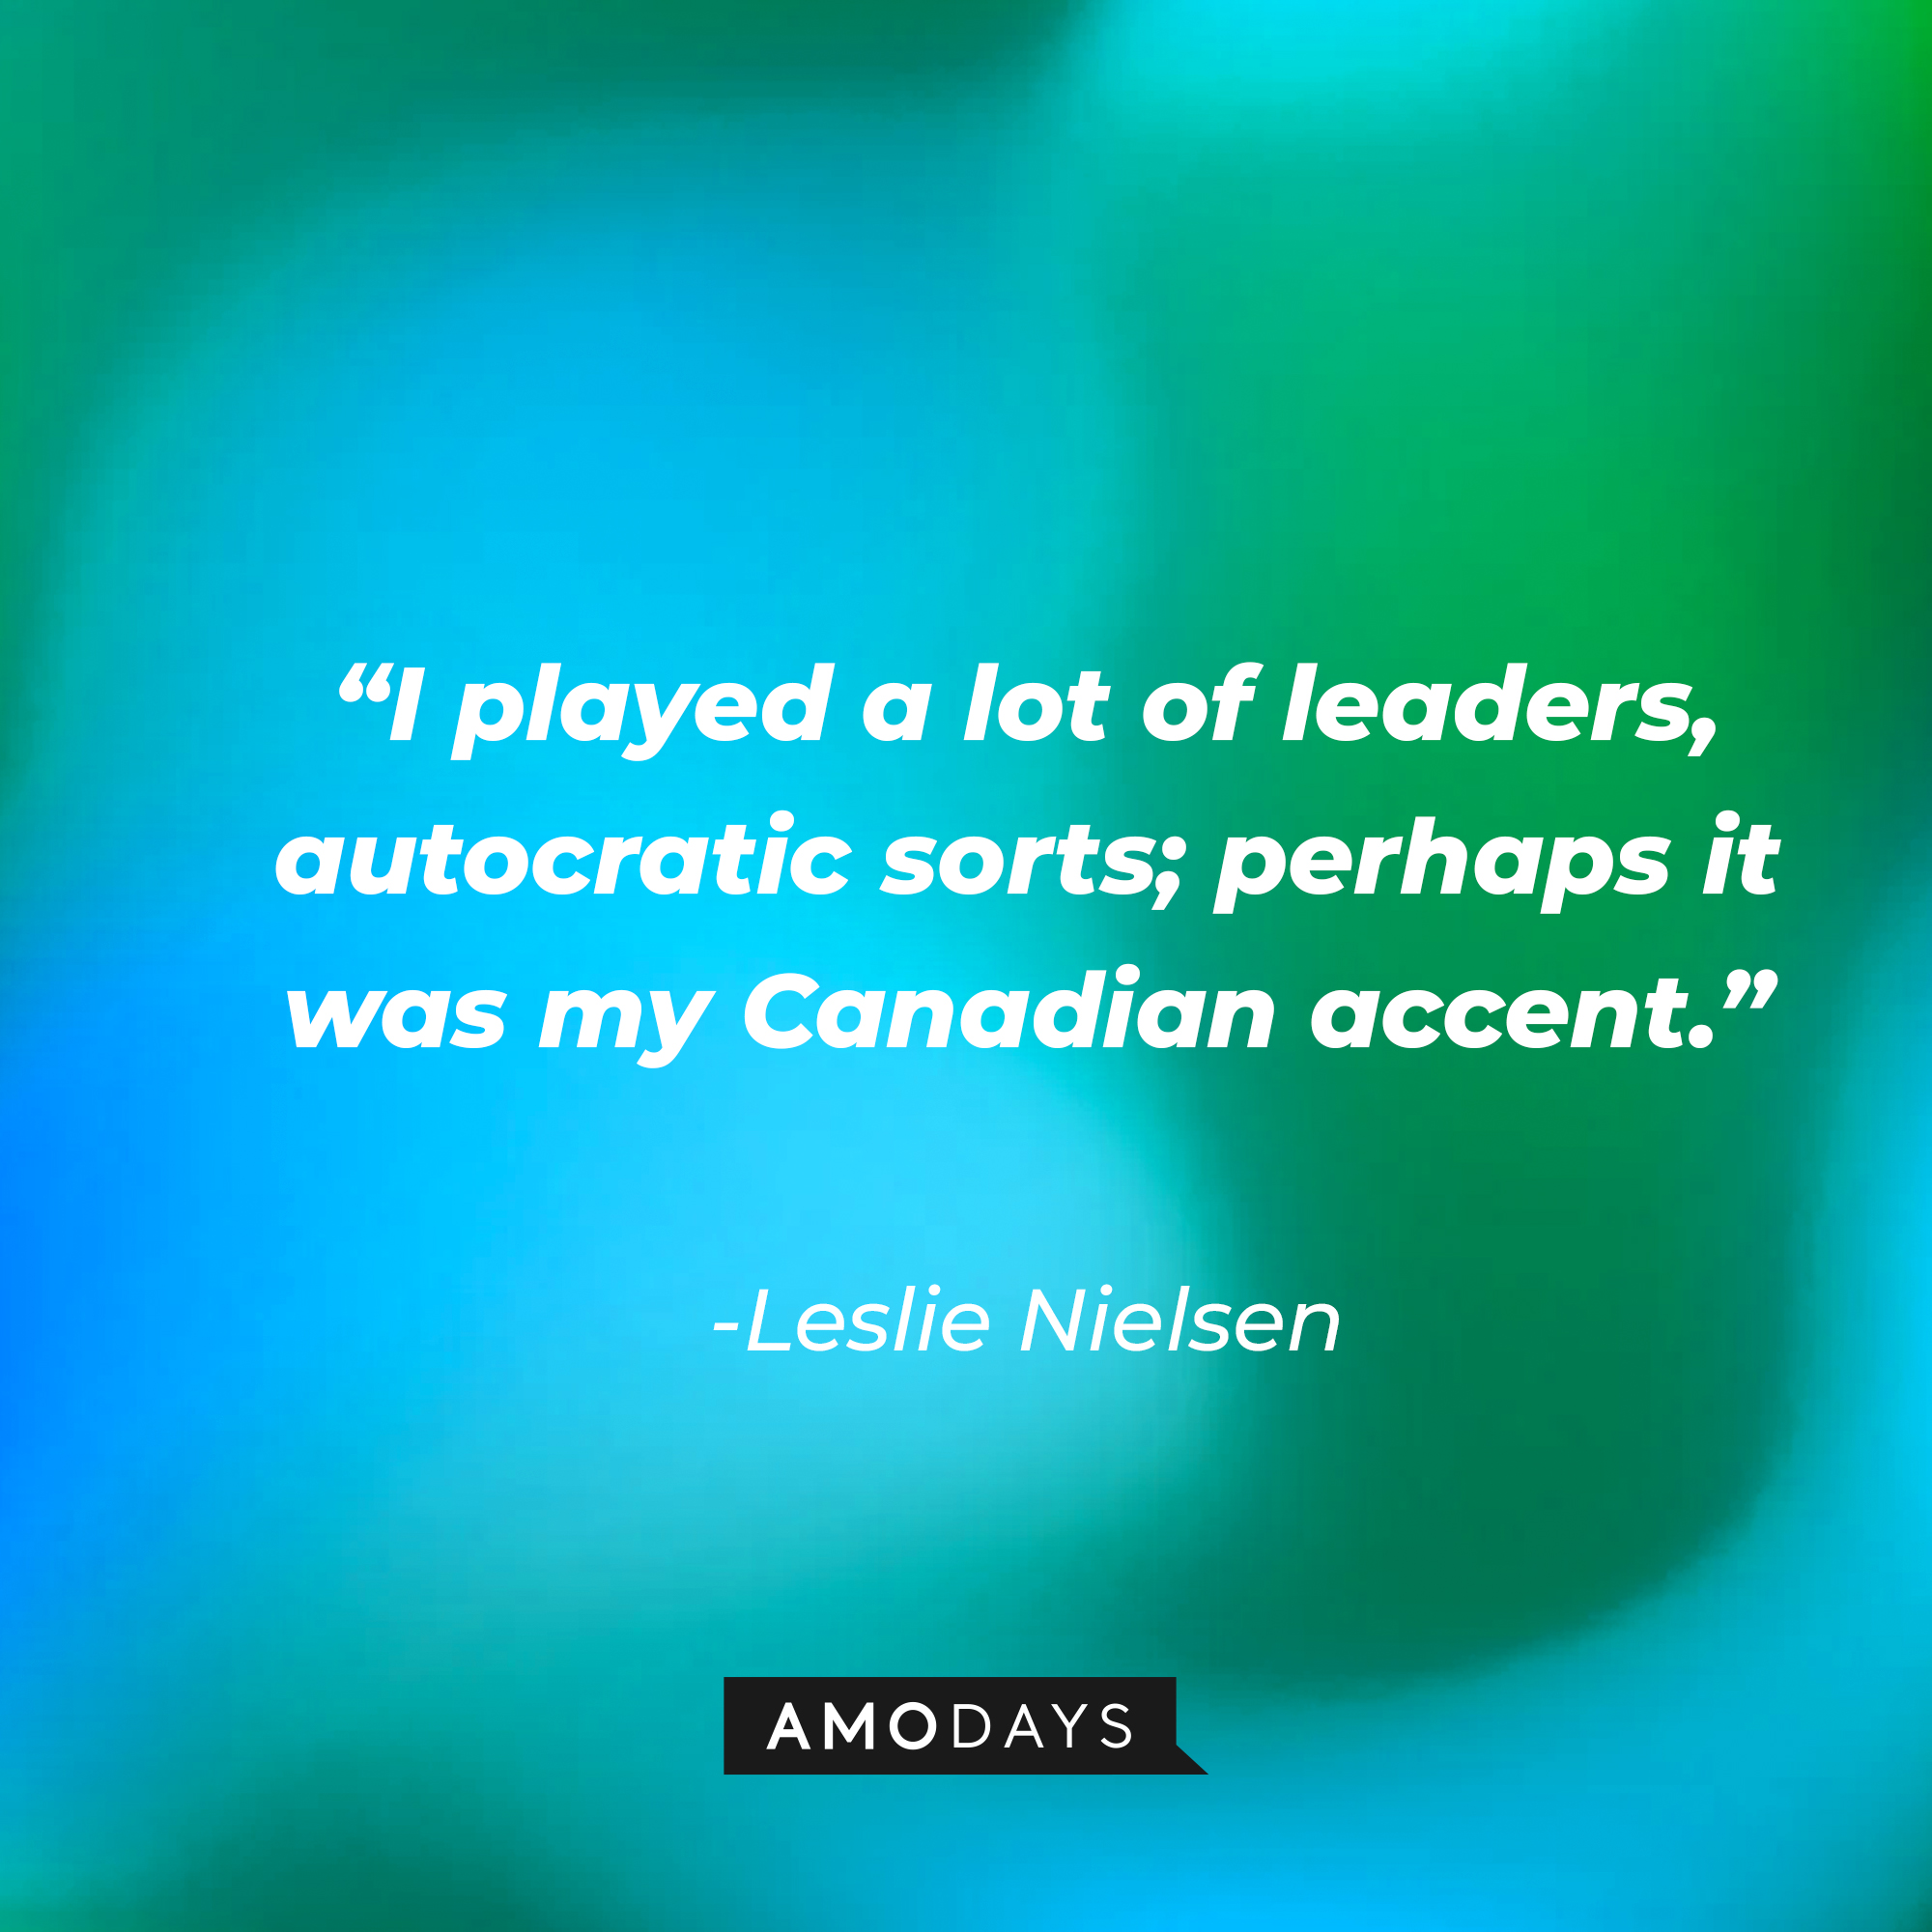 Leslie Nielsen's quote: "I played a lot of leaders, autocratic sorts; perhaps it was my Canadian accent." | Source: Amodays